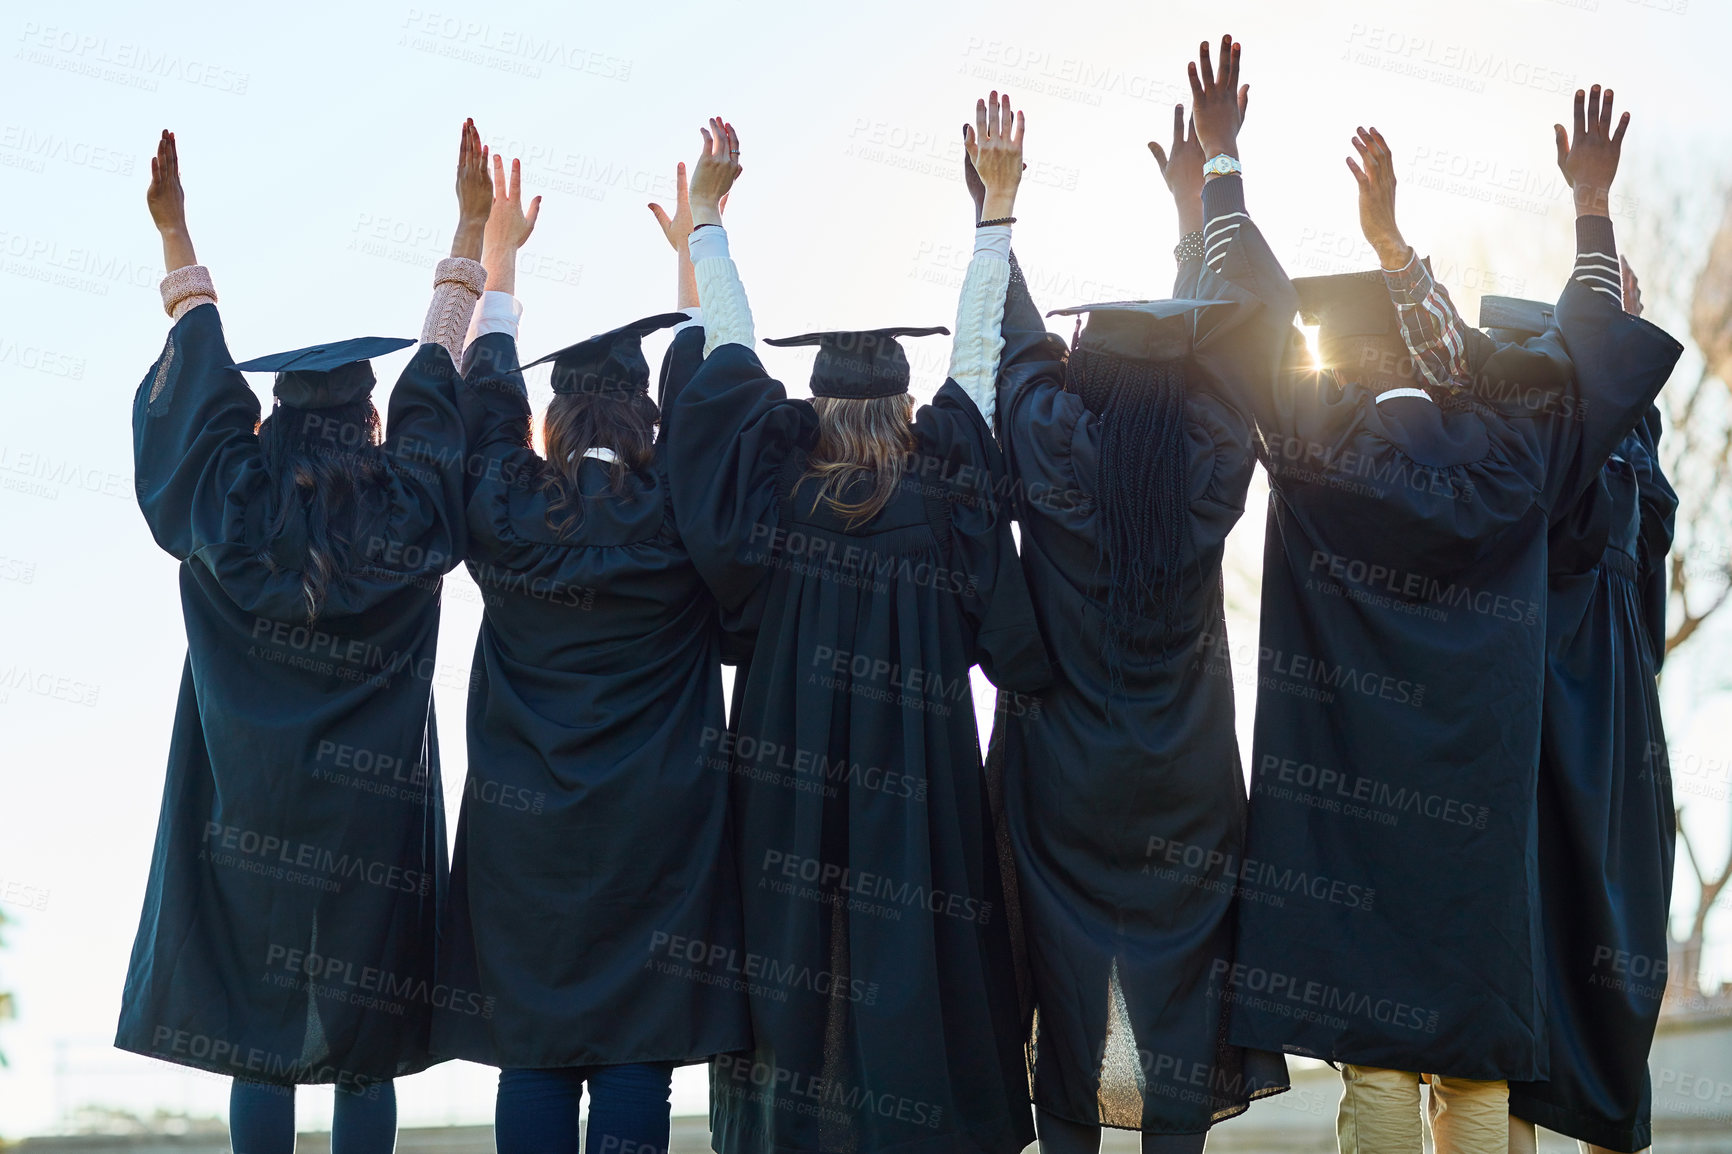 Buy stock photo Rearview shot of a group of students standing in a line with their arms raised on graduation day